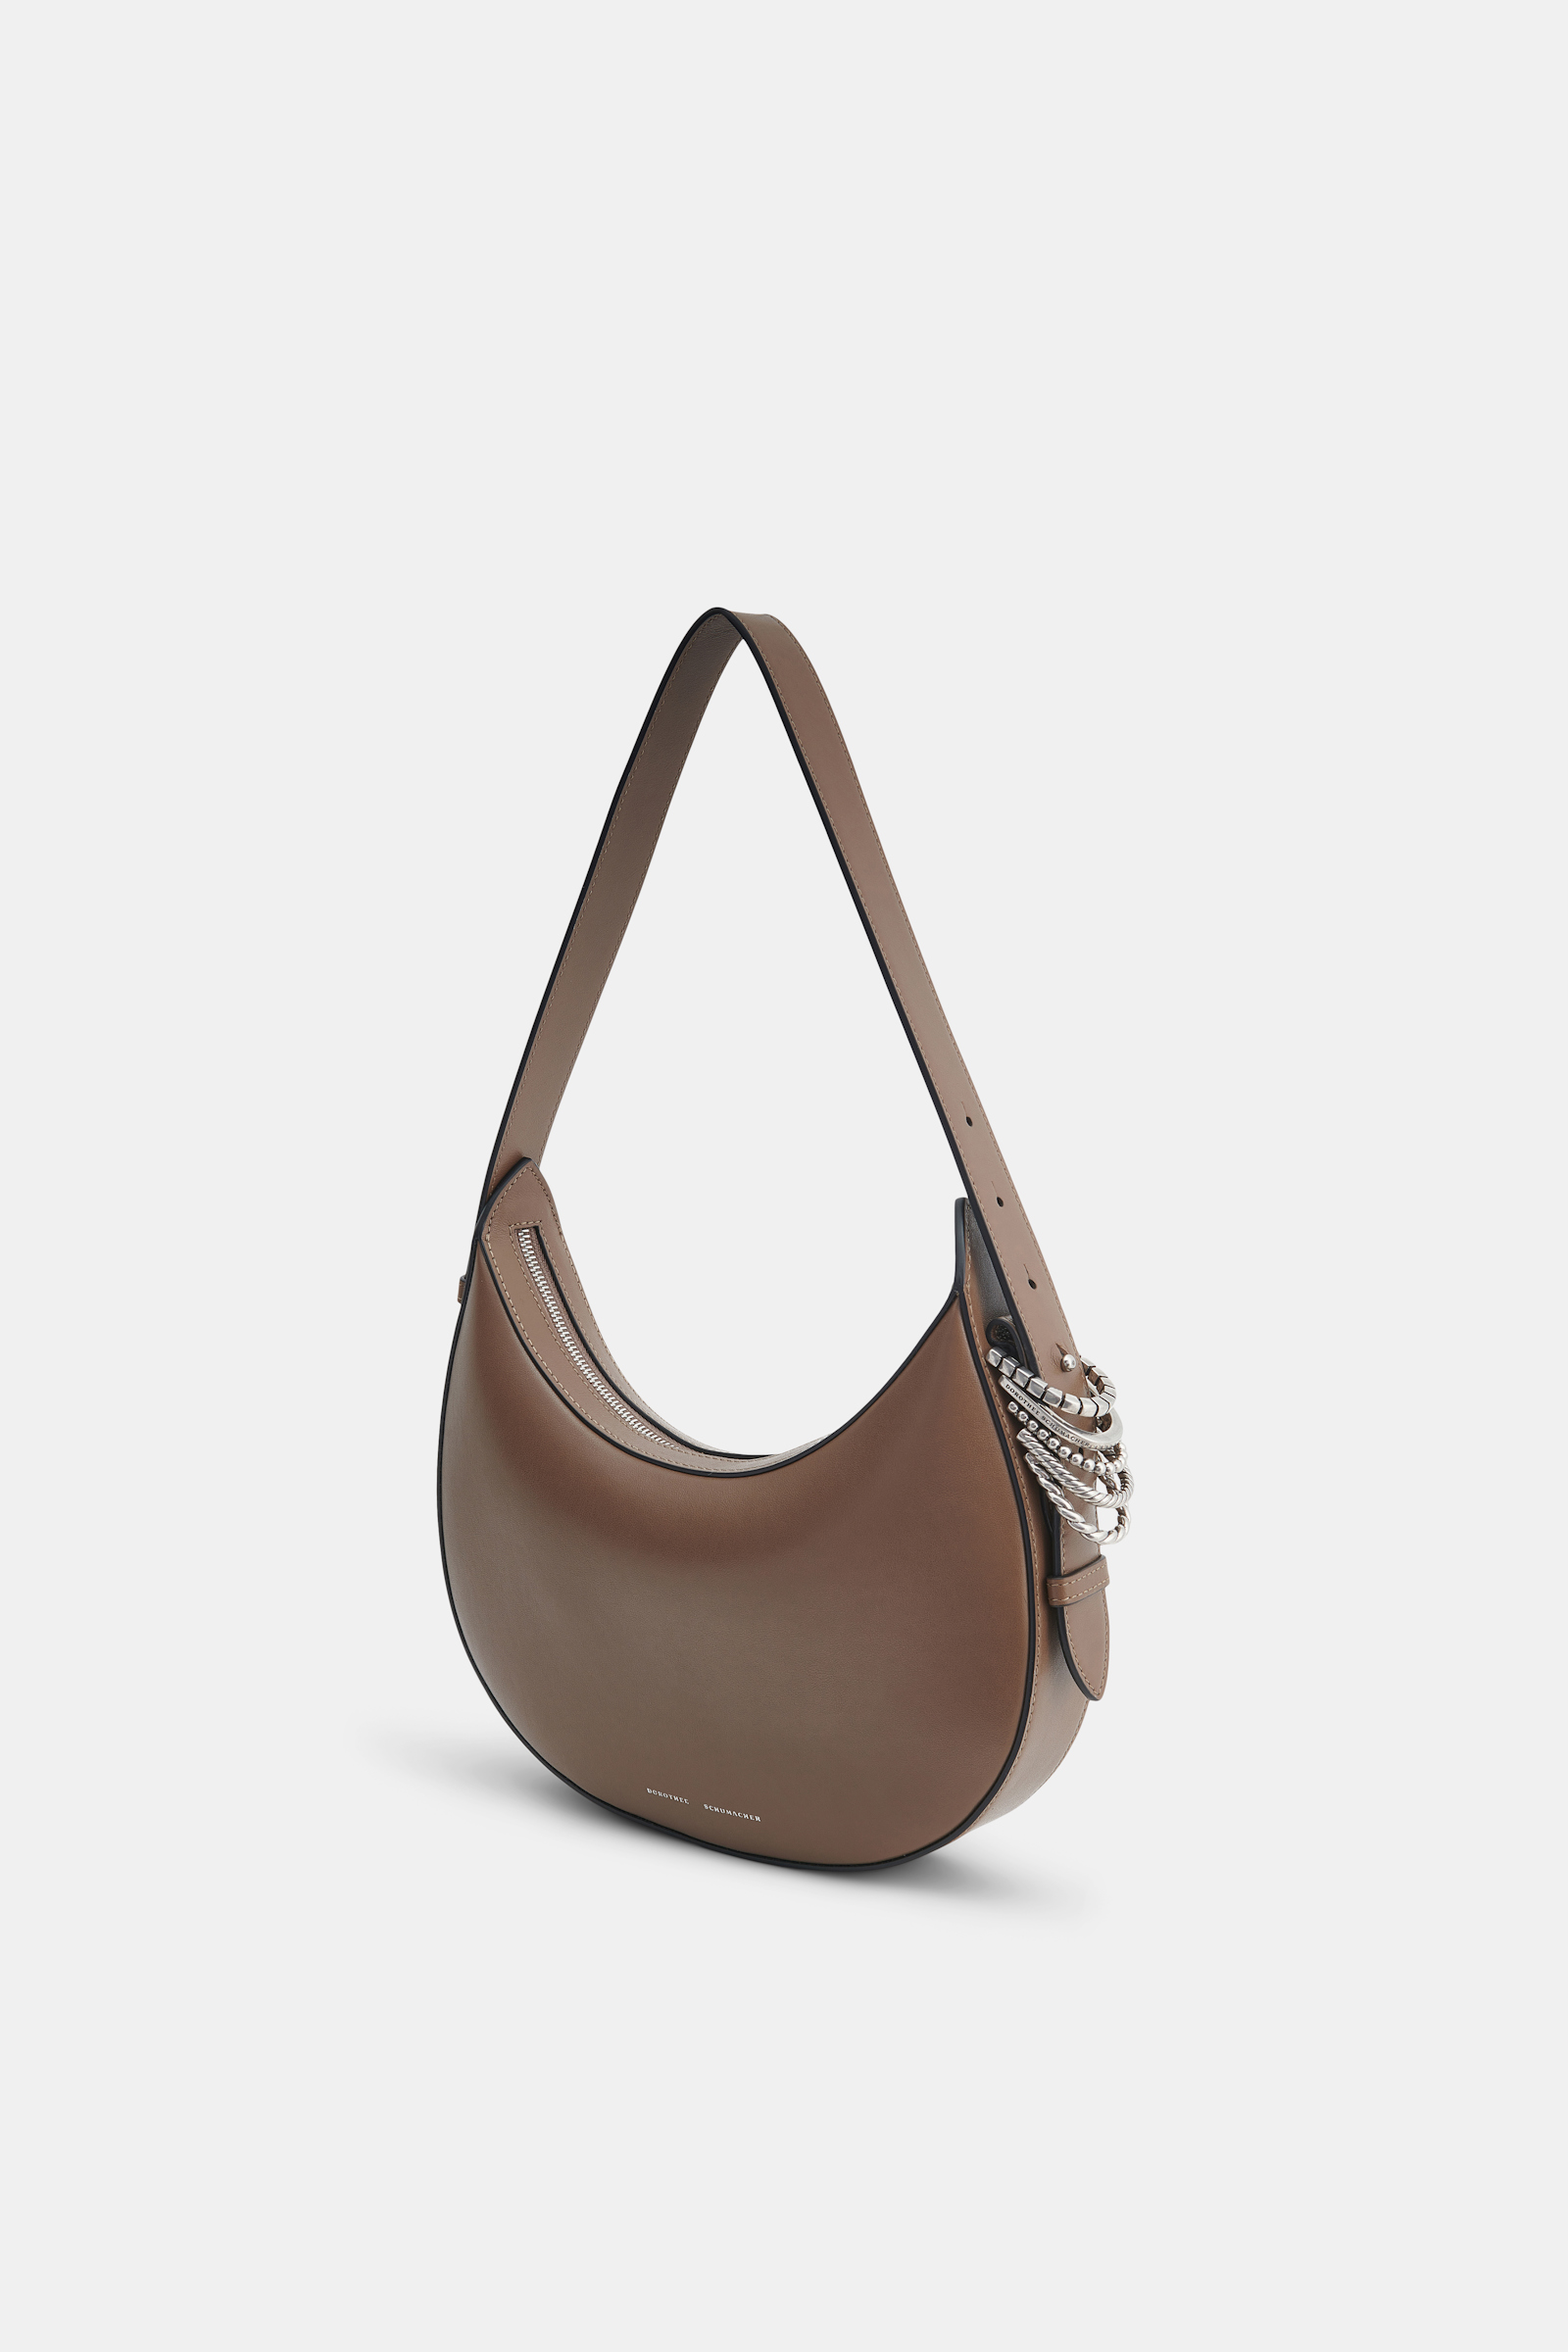 Dorothee Schumacher Half Moon Bag in soft calf leather with D-ring hardware taupe